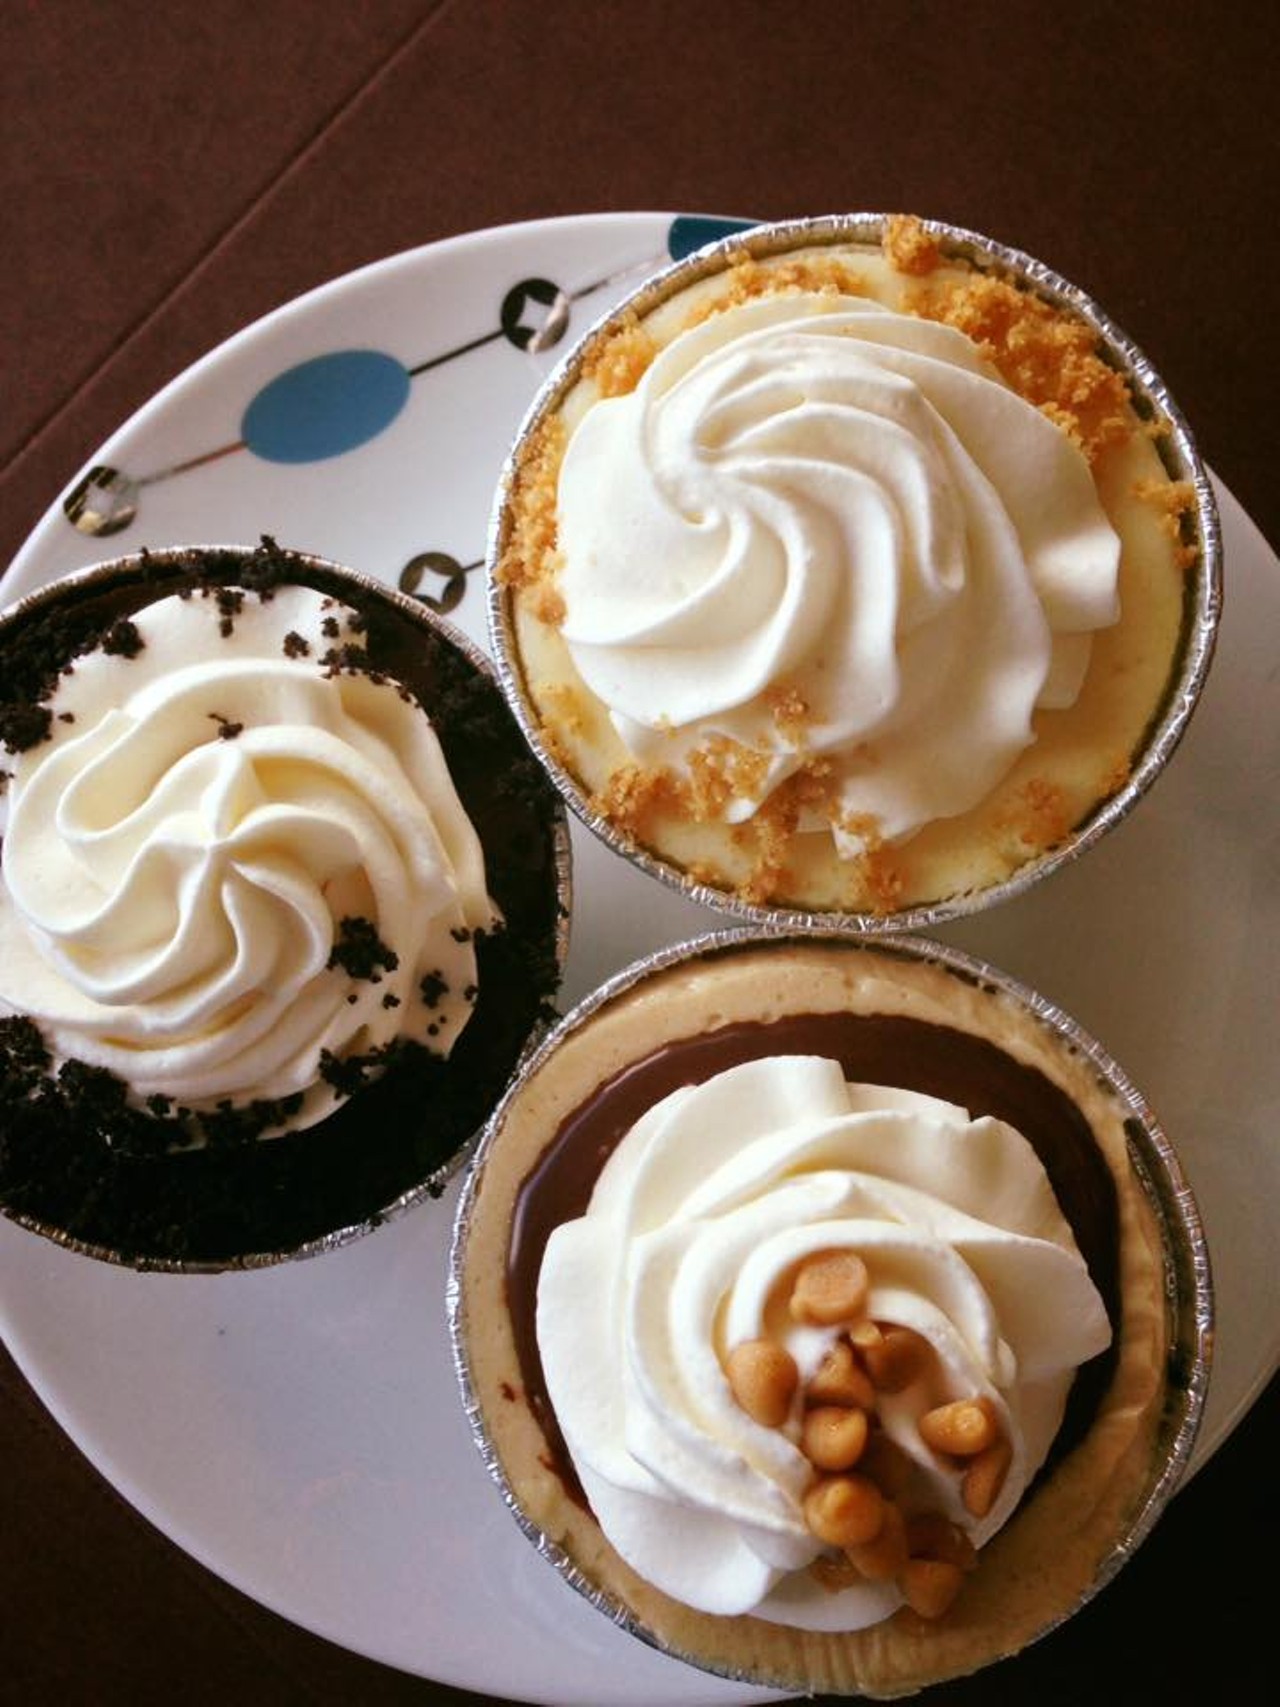 Sugarbuzz Dezert Company
4339 Edgewater Drive, 407-929-6542
Sugarbuzz offers individual-sized pies in flavors like Key lime, chocolate cream, coconut cream and peanut butter.
Photo via Sugarbuzz Desserts/Facebook